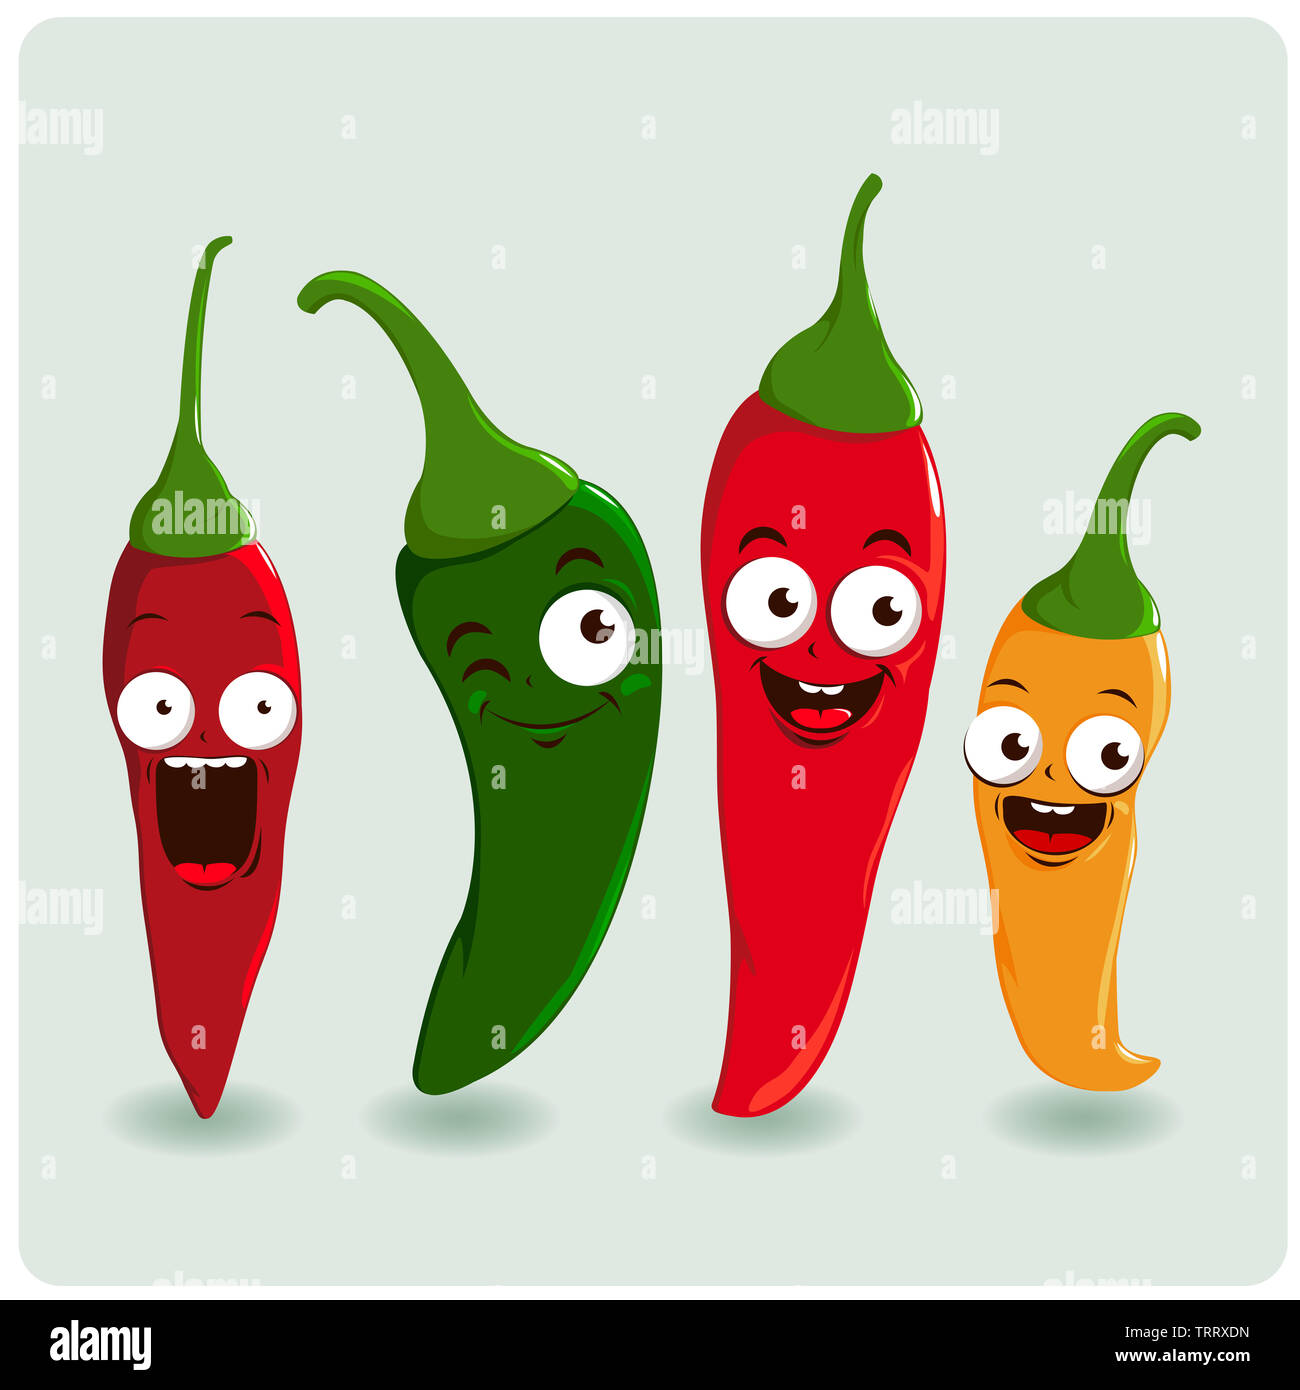 Four delicious and hot chili pepper characters in four colors:  red, green and yellow chili peppers. Stock Photo